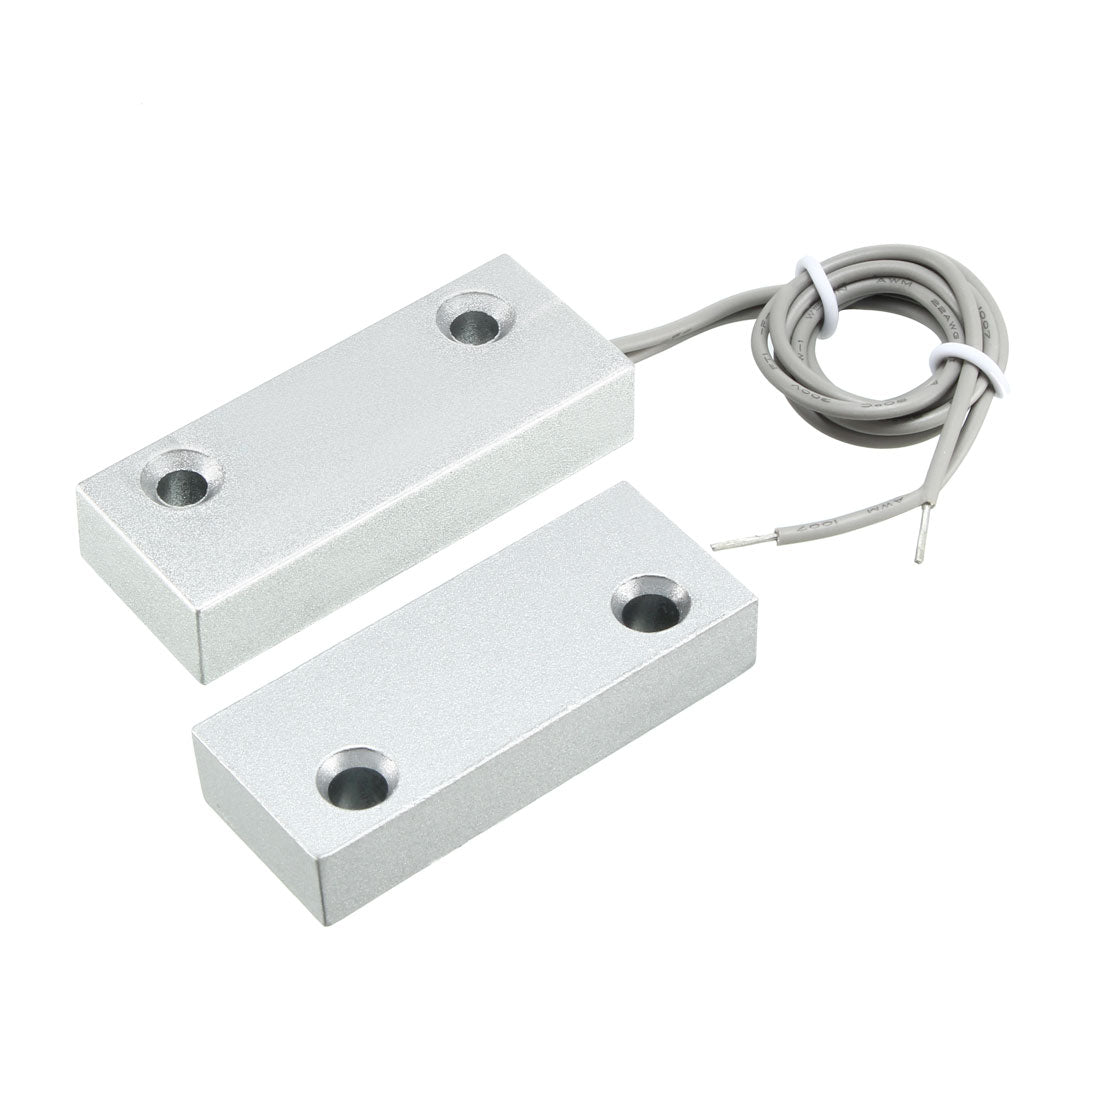 uxcell Uxcell MC-59 NC Alarm Security Rolling Gate Garage Door Contact Magnetic Reed Switch Silver Gray